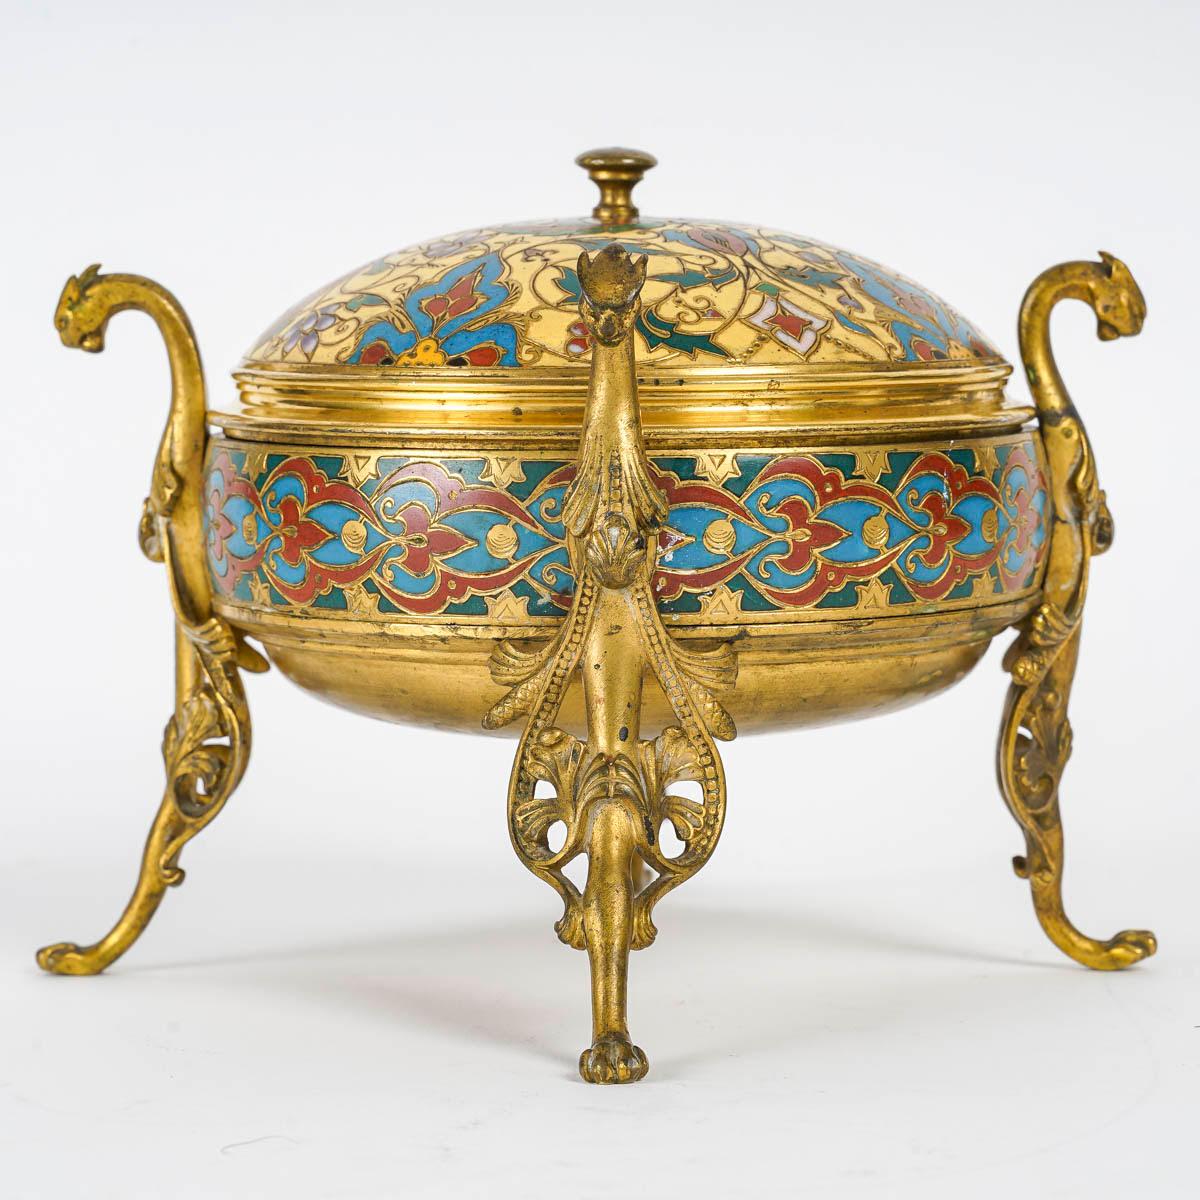 Enamelled bronze box, signed F. Barbedienne, 19th century, Napoleon III period.

Yellow, blue and red enamelled bronze box, signed F. Barbedienne, 19th century, Napoleon III period.
h: 15cm, d: 21,5cm
